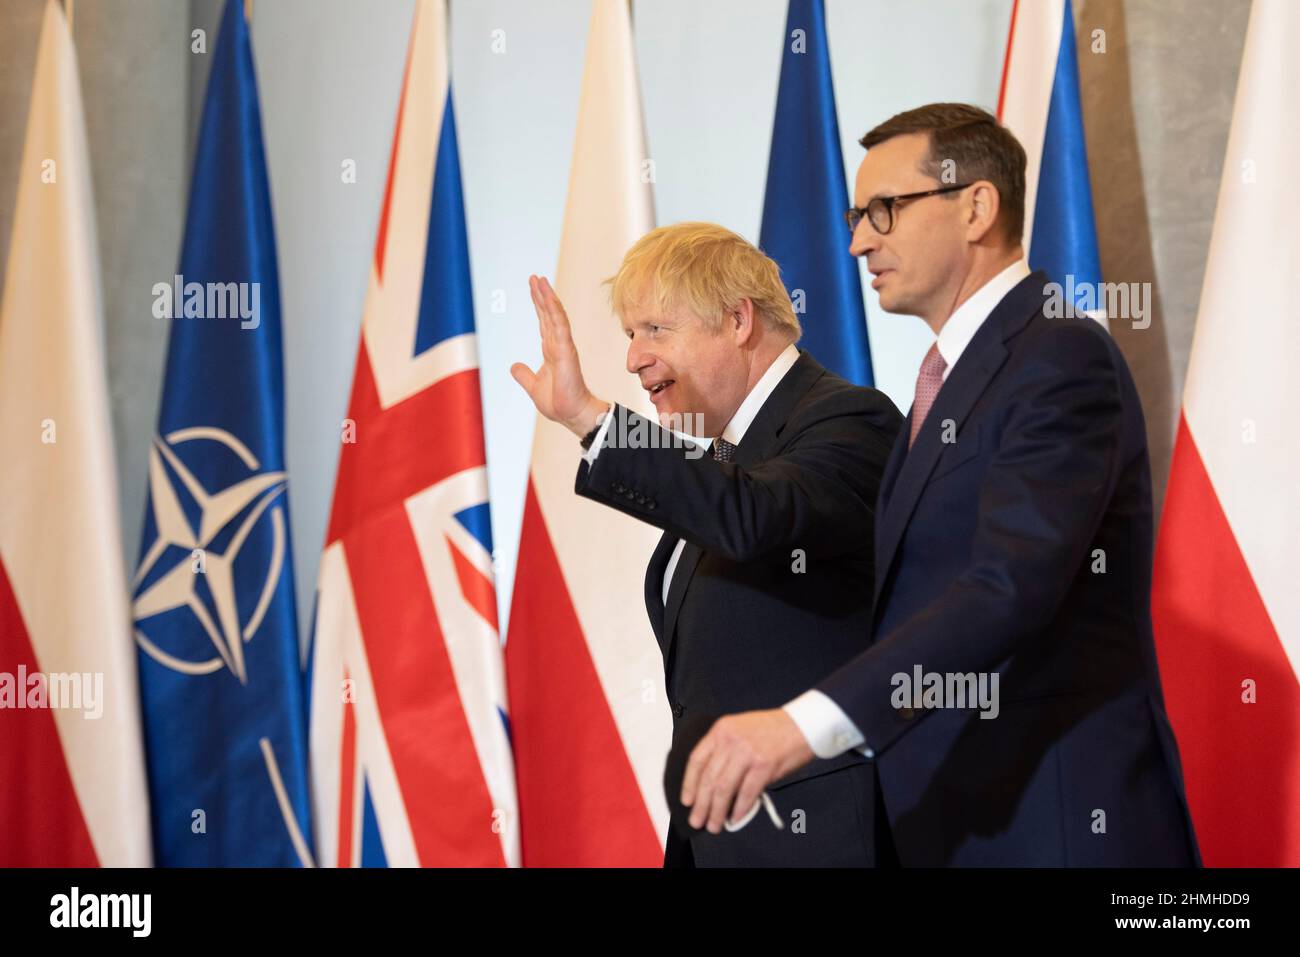 Warsaw, Warsaw, Poland. 10th Feb, 2022. Polish Prime Minister MATEUSZ MORAWIECKI (R) welcomes the Prime Minister of Britain BORIS JOHNSON (L) at the chancellery of the PM ahead of talks on February 10, 2022 in Warsaw, Poland. The British Prime Minister Borish Johnson met Polish Prime Minister Mateusz Morawiecki to discuss about security in eastern Europe and Russian military build up on the border with Ukraine. Credit: ZUMA Press, Inc./Alamy Live News Stock Photo